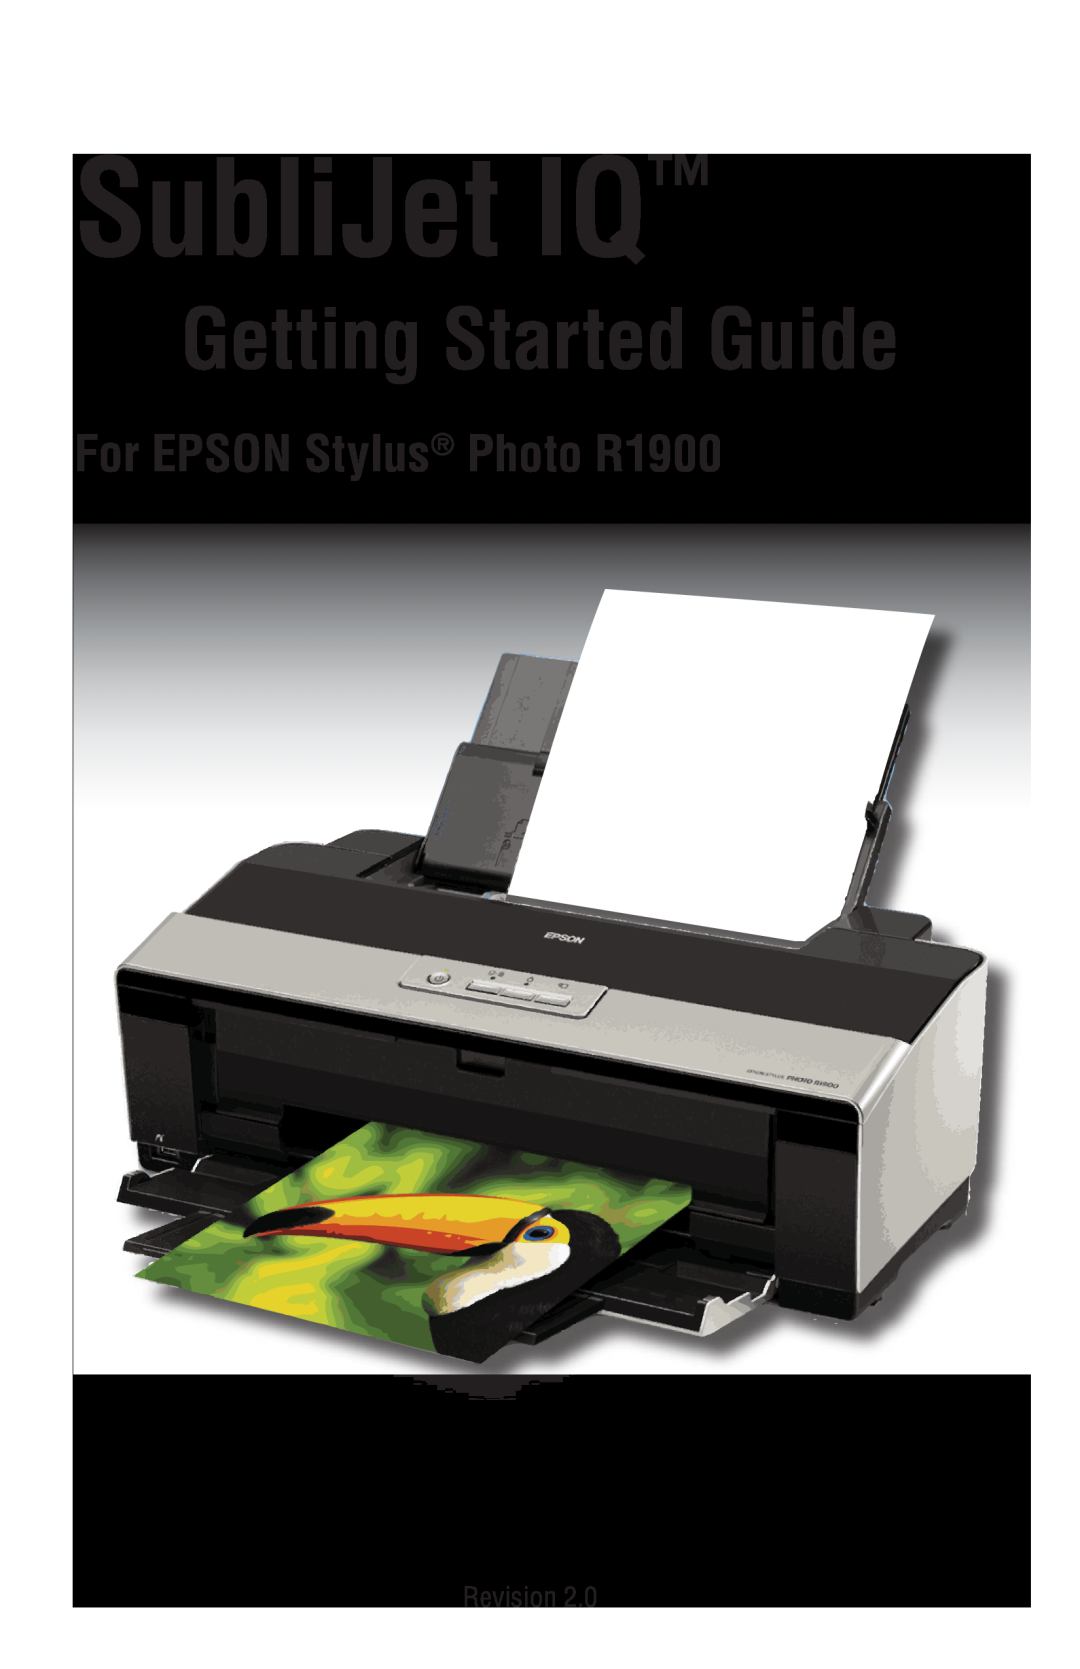 Epson manual For EPSON Stylus Photo R1900, SubliJet IQ, Getting Started Guide 